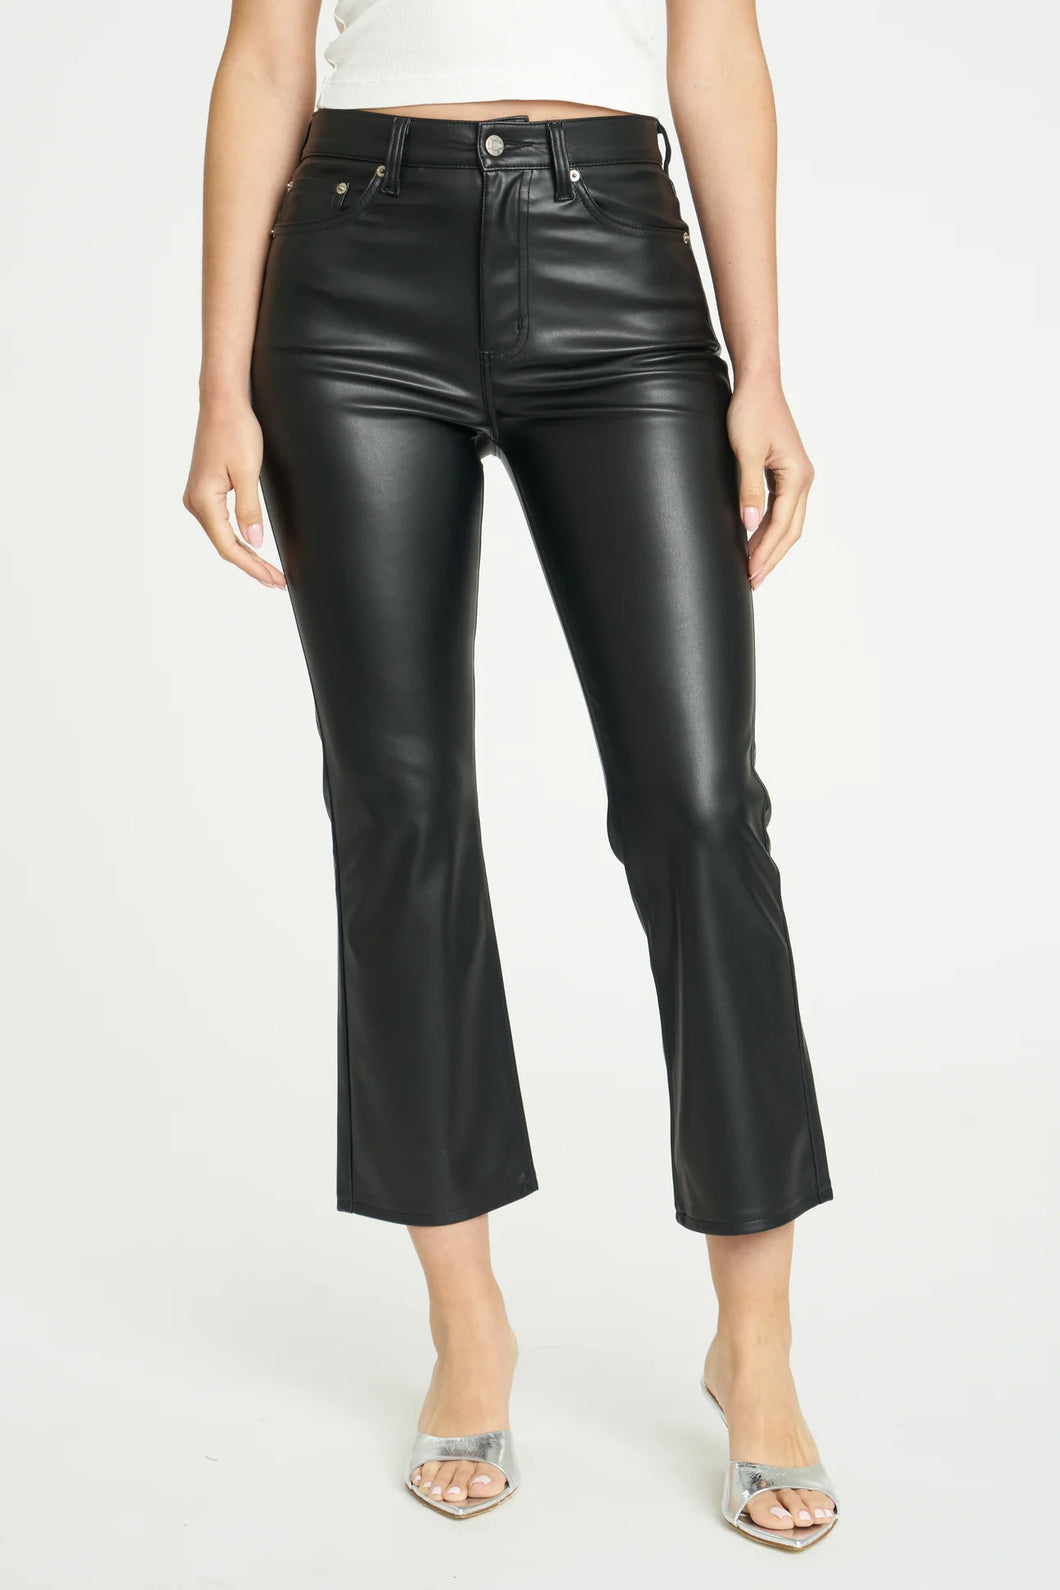 Shy Girl Leather Crop Flare